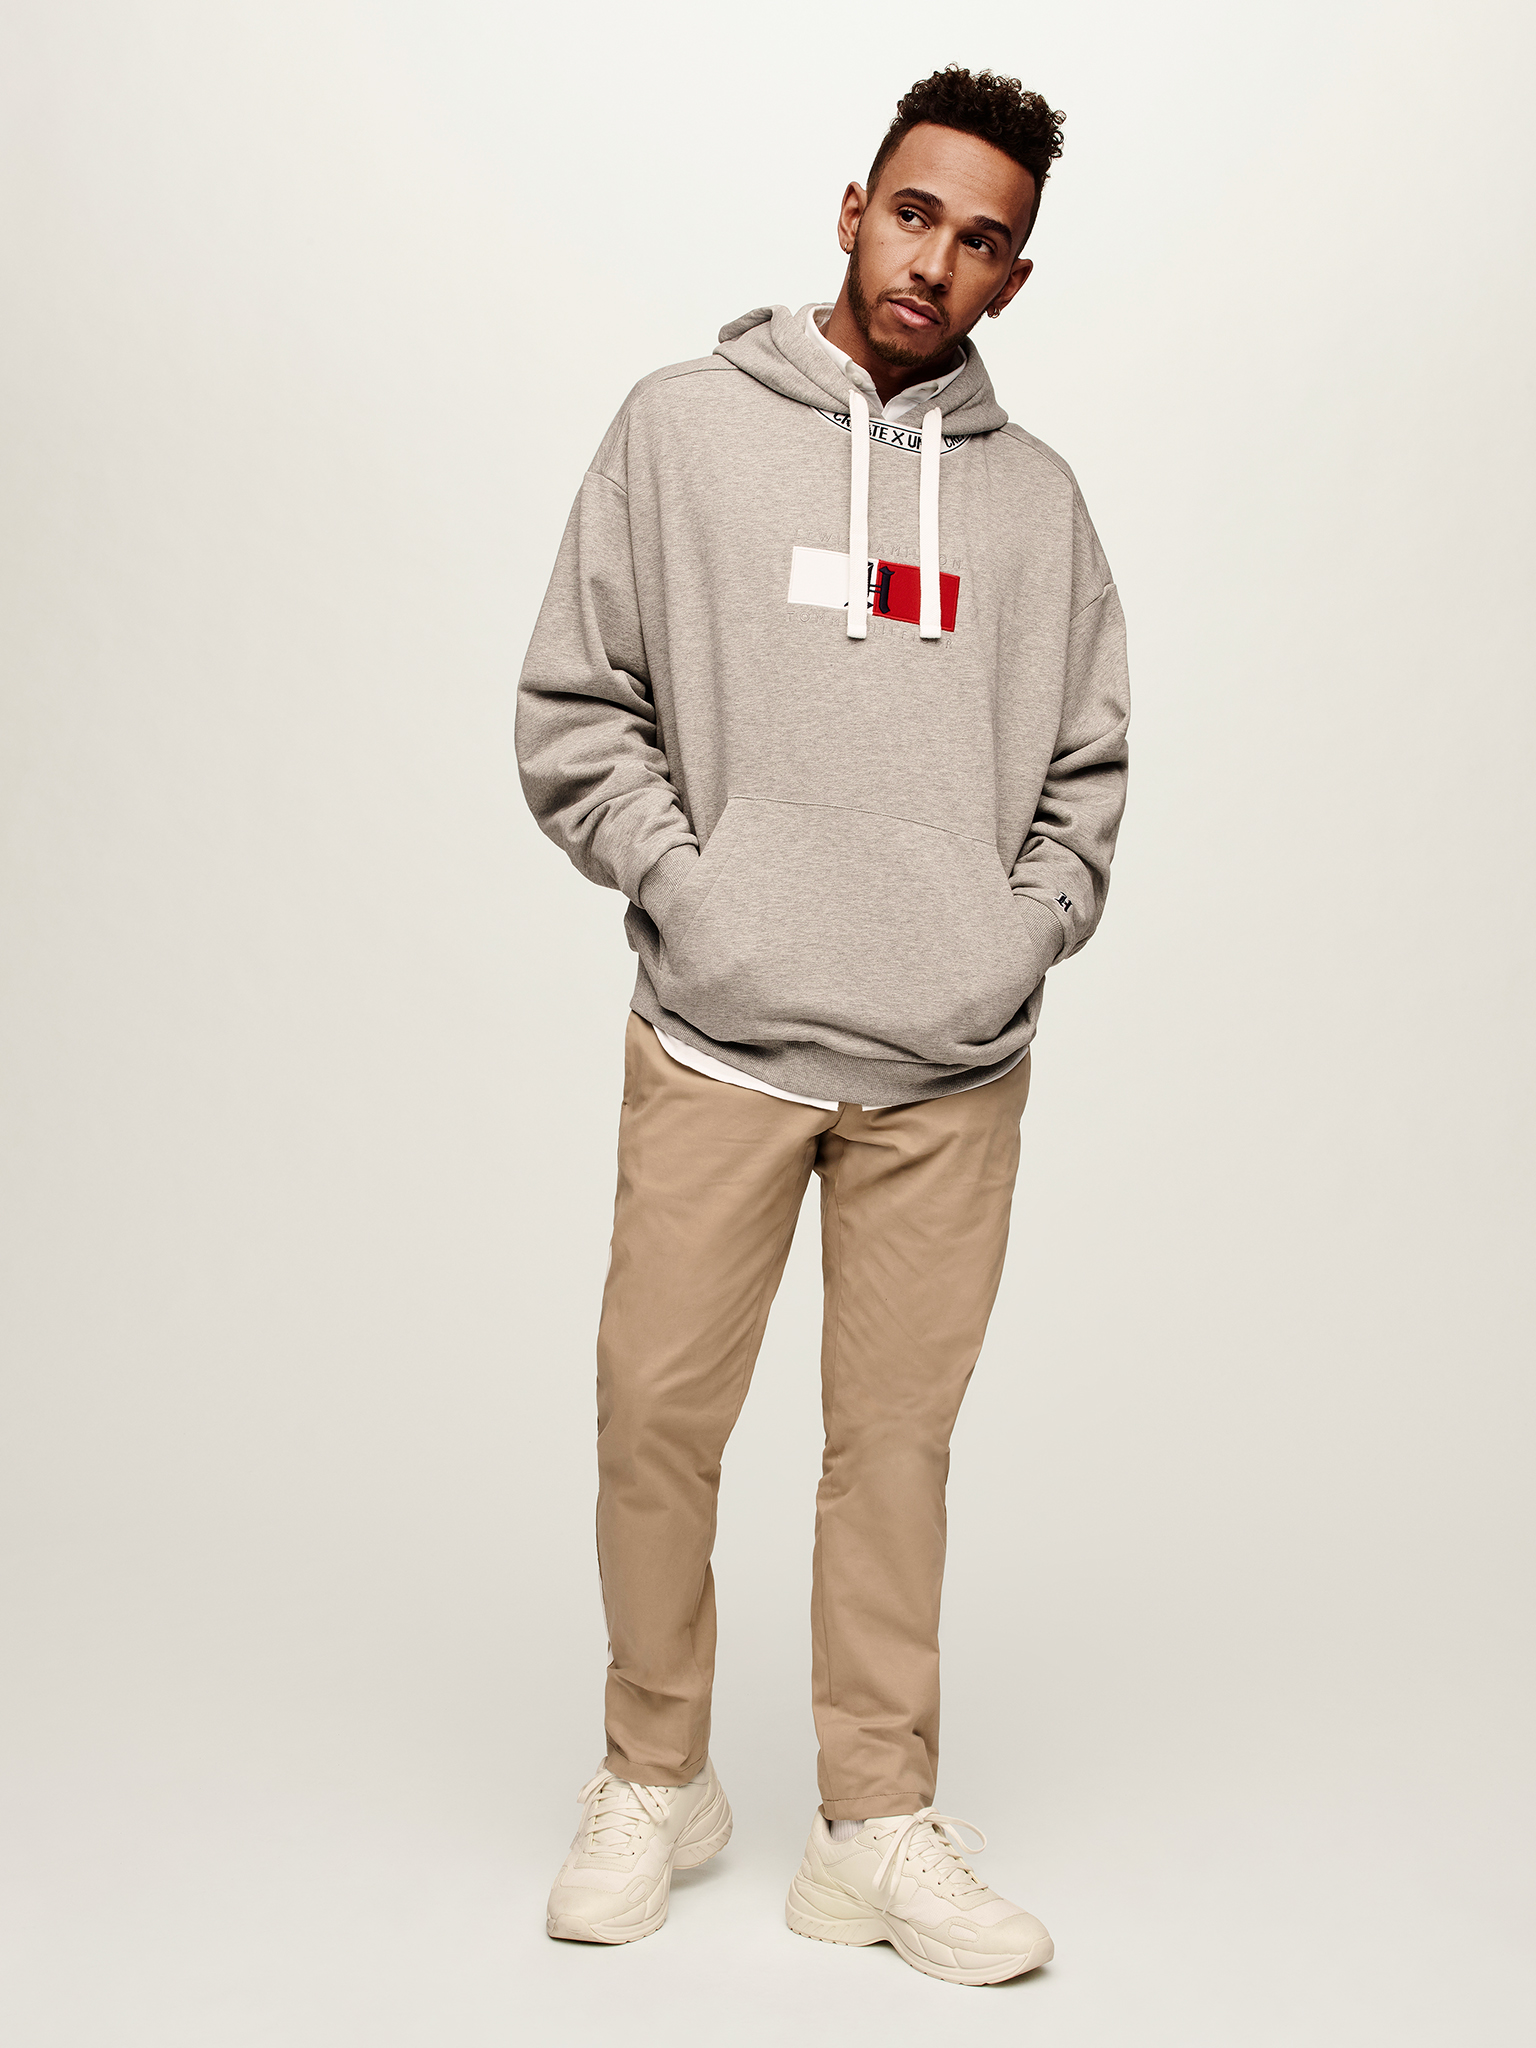 Tommy Hilfiger launches its second TOMMYXLEWIS collaboration - ICON